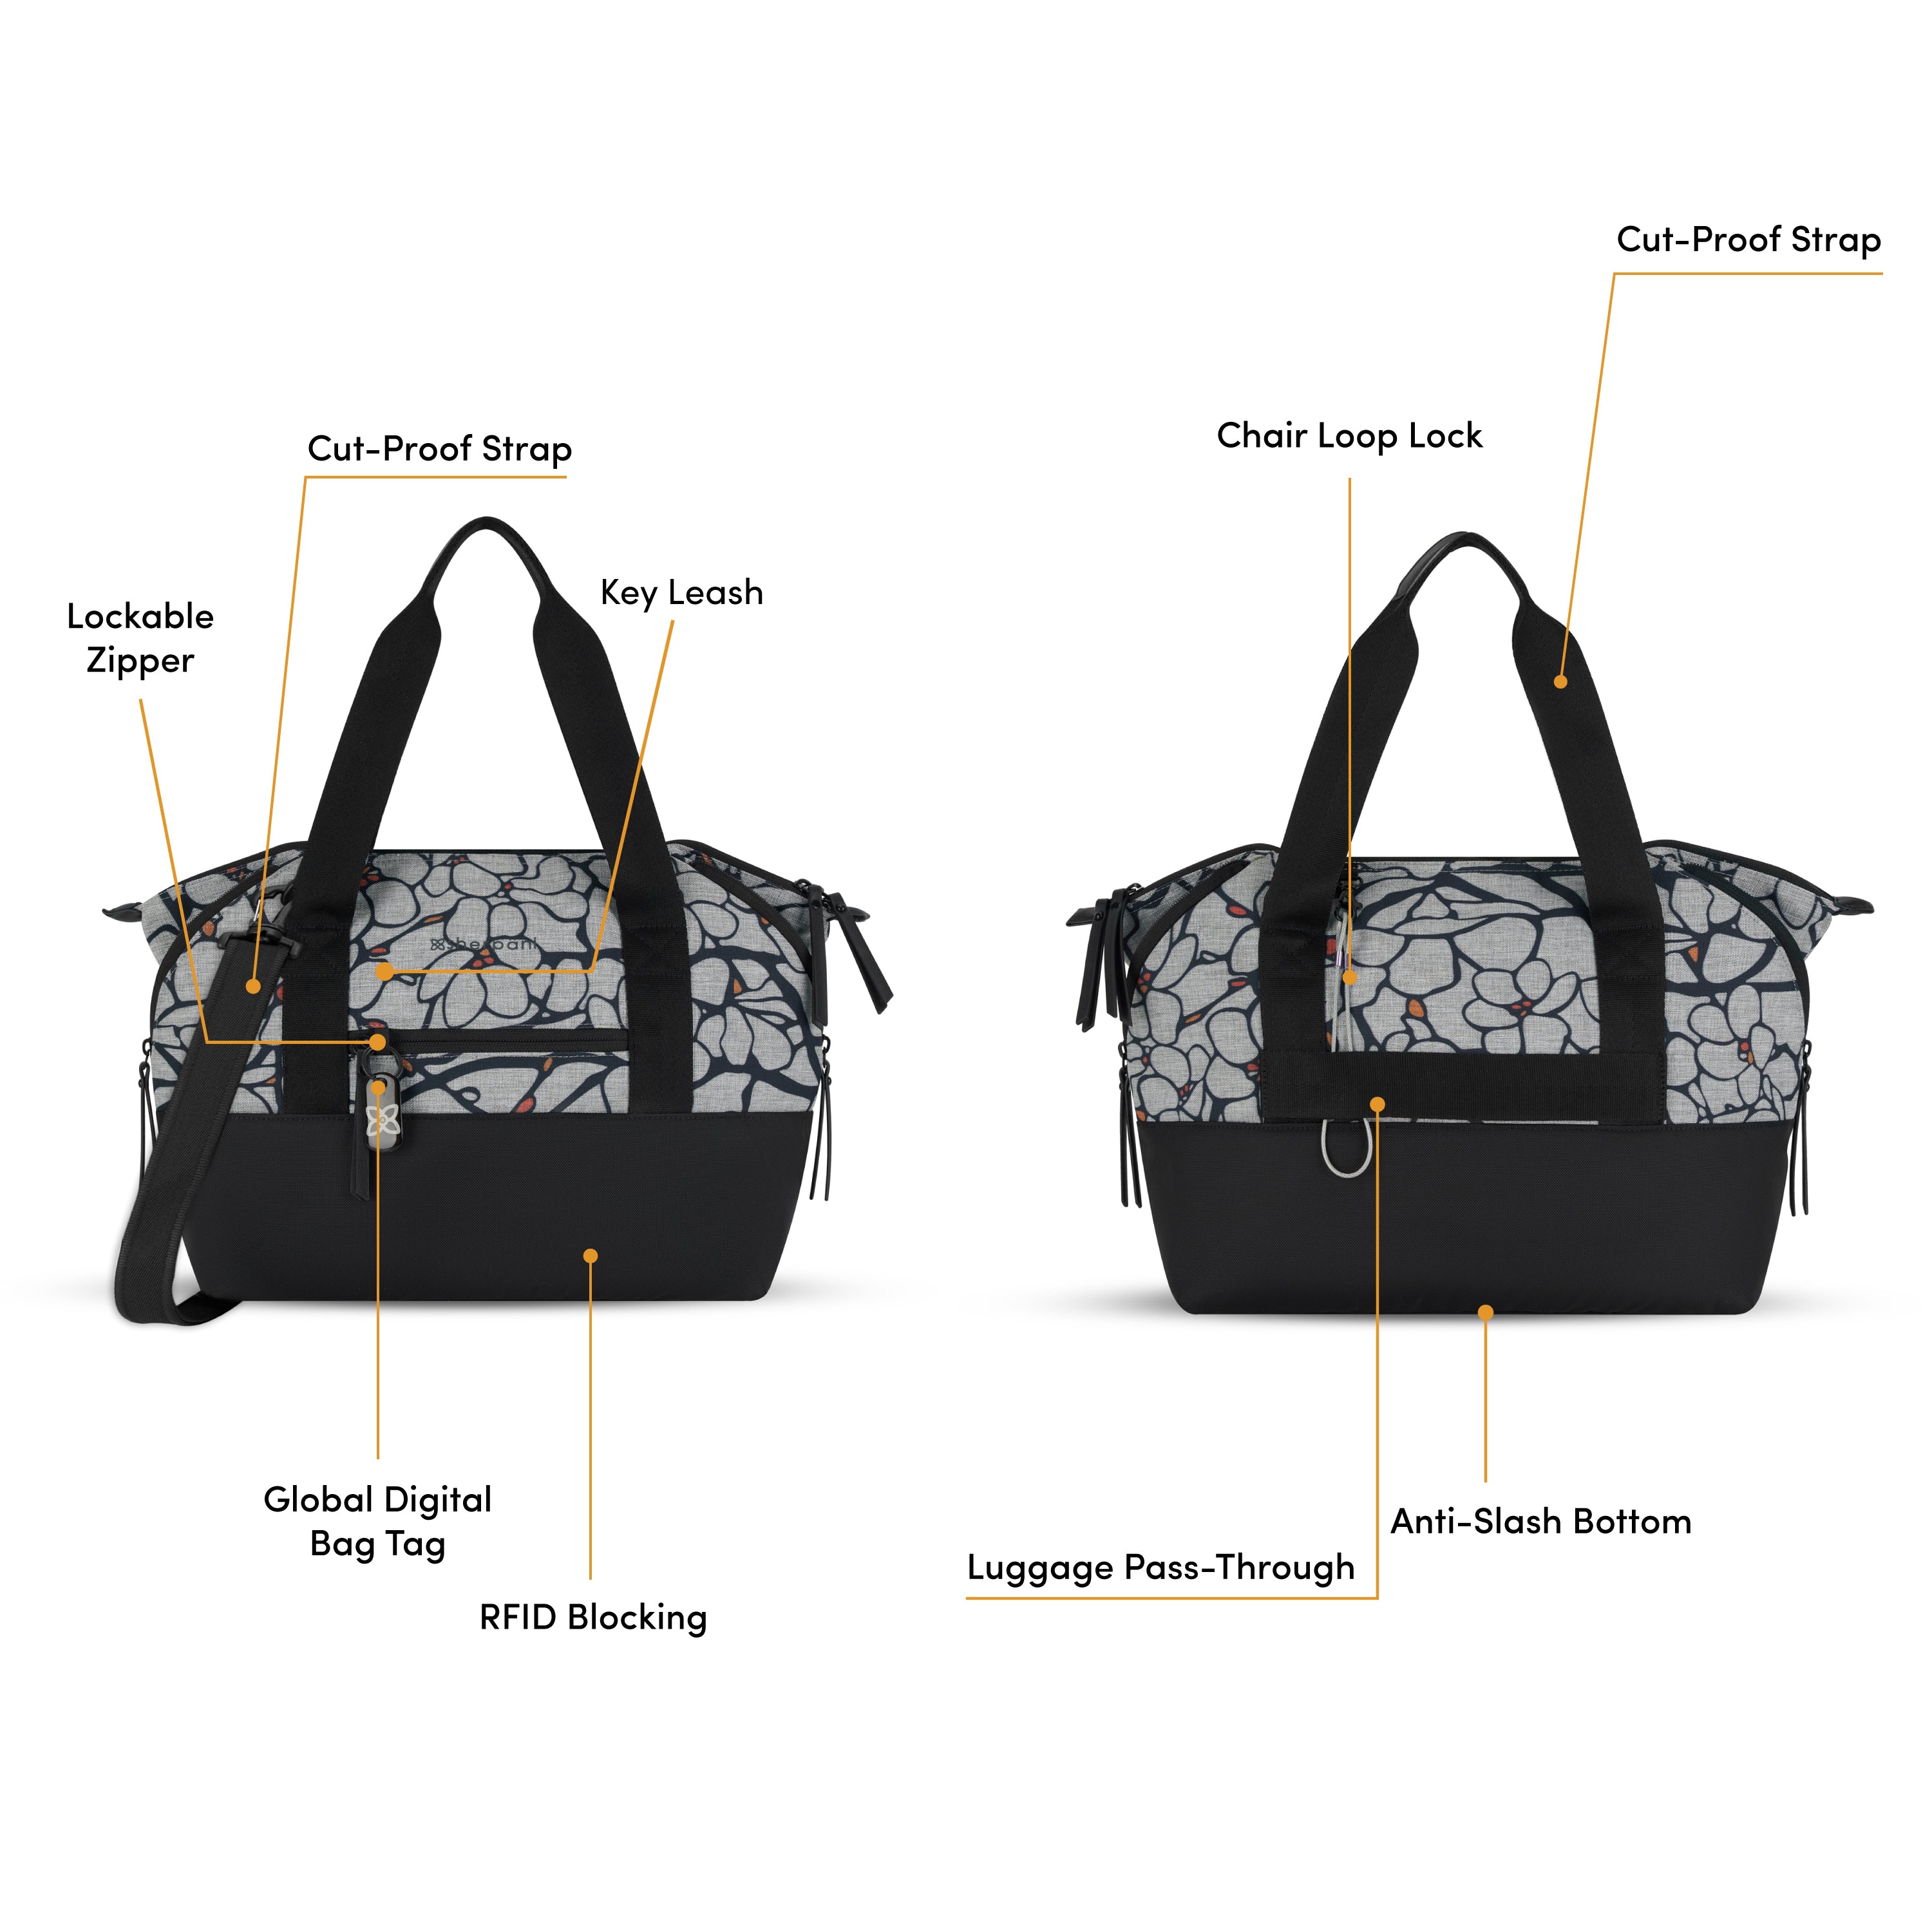 Graphic showcasing the features of Sherpani expandable purse, the Eclipse. Bag features include: Cut-Proof Strap, Lockable Zipper, Key Leash, Global Digital Bag Tag, RFID-Blocking Technology, Chair Loop Lock, Luggage Pass-Through and Anti-Slash Bottom. 